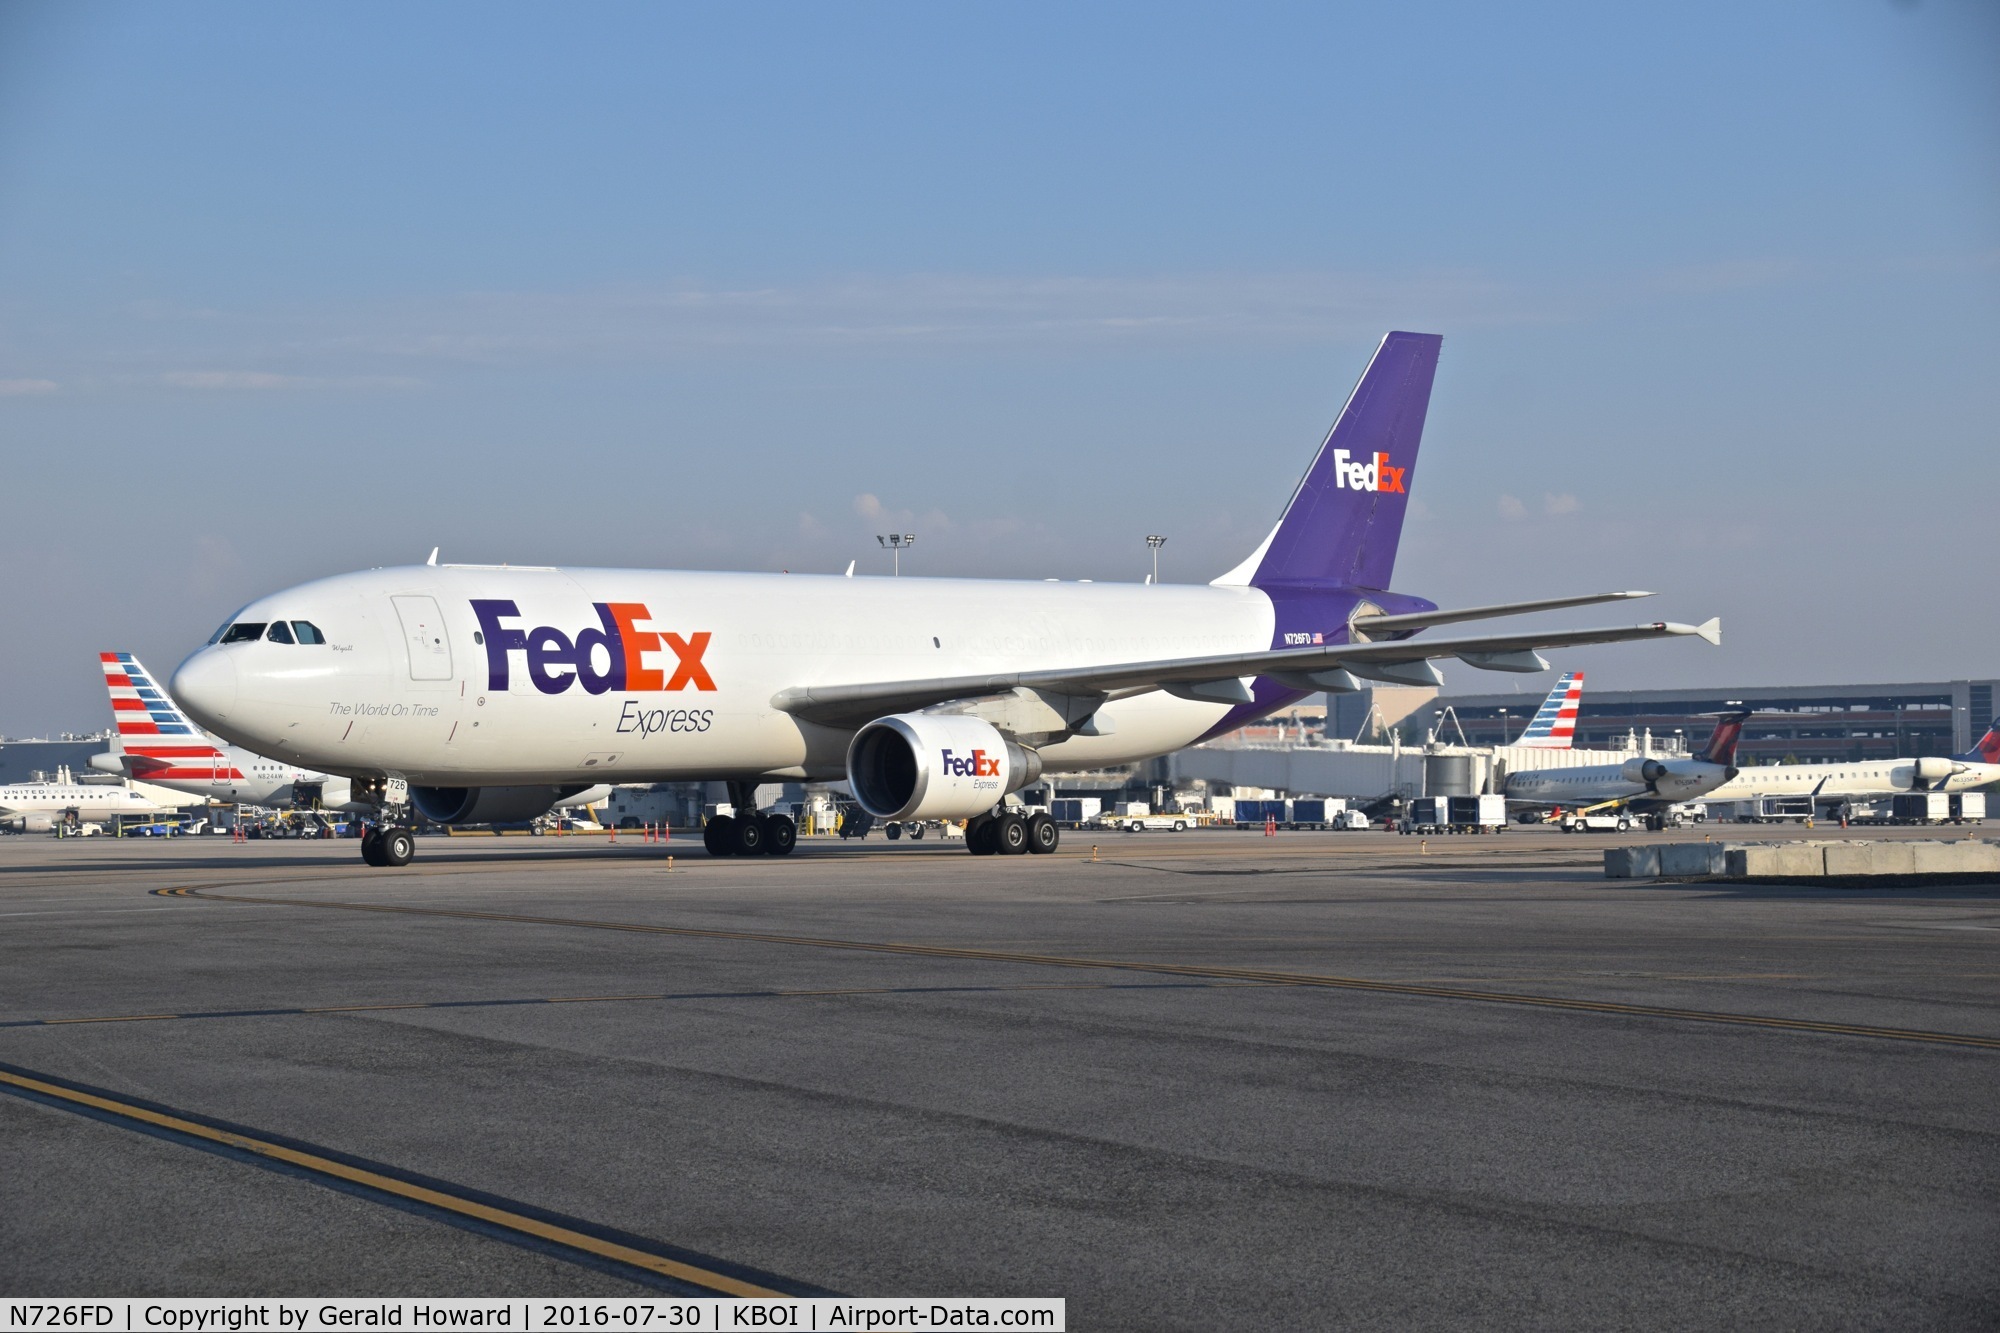 N726FD, 1990 Airbus A300B4-622R C/N 575, Taxiing on Delta from the FedEx ramp.